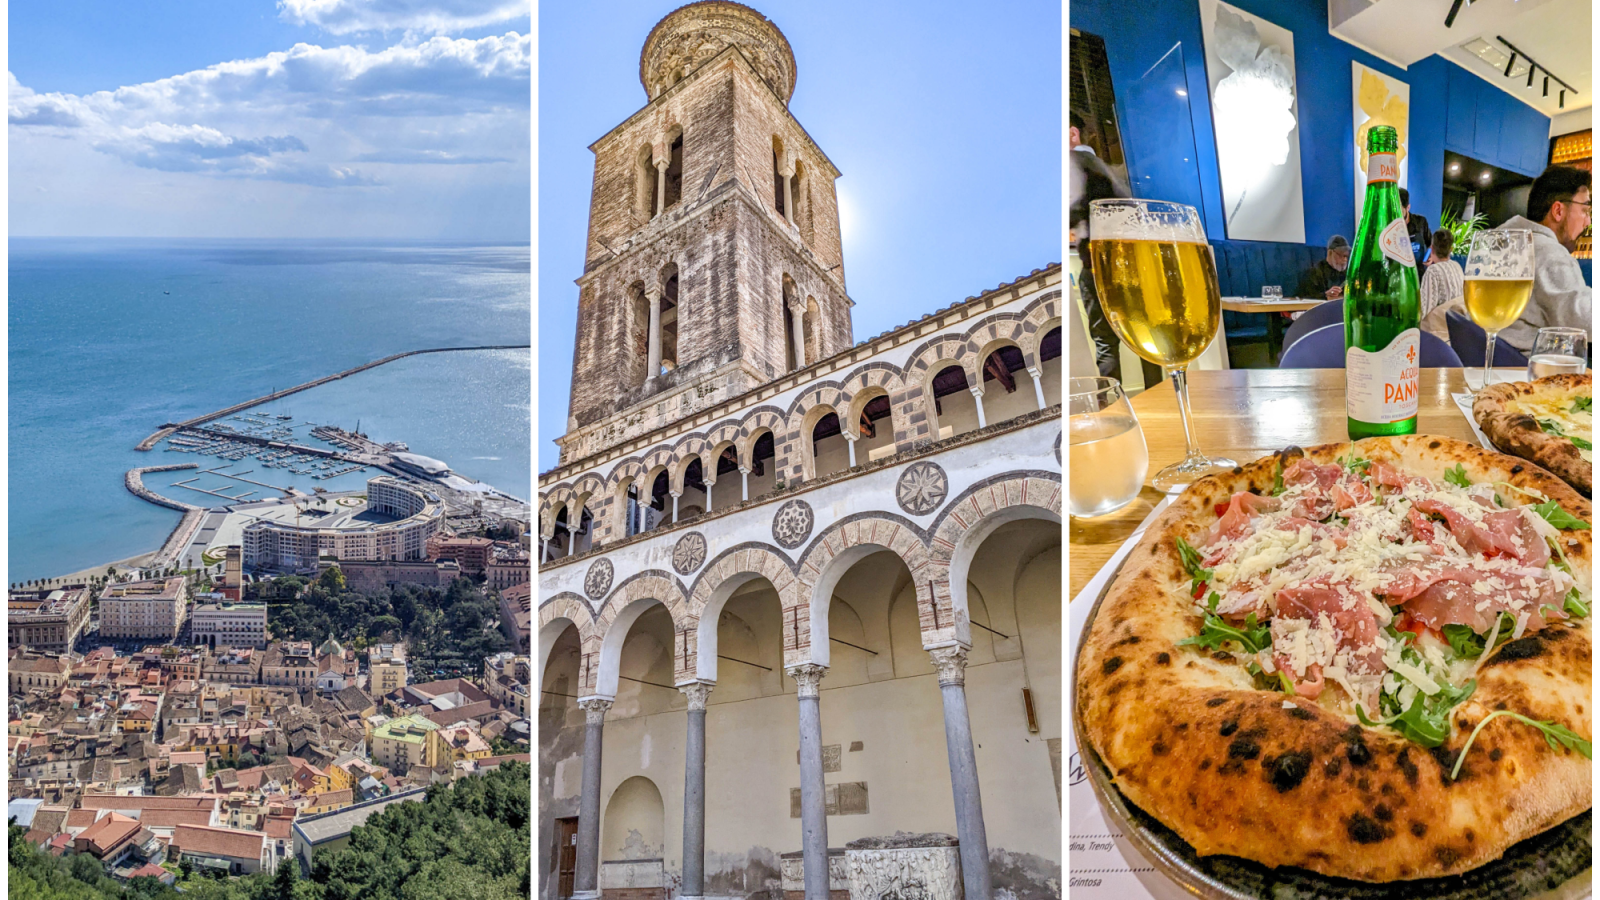 three images: overhead view of city and ocean, church bell tower, table with pizza and beer